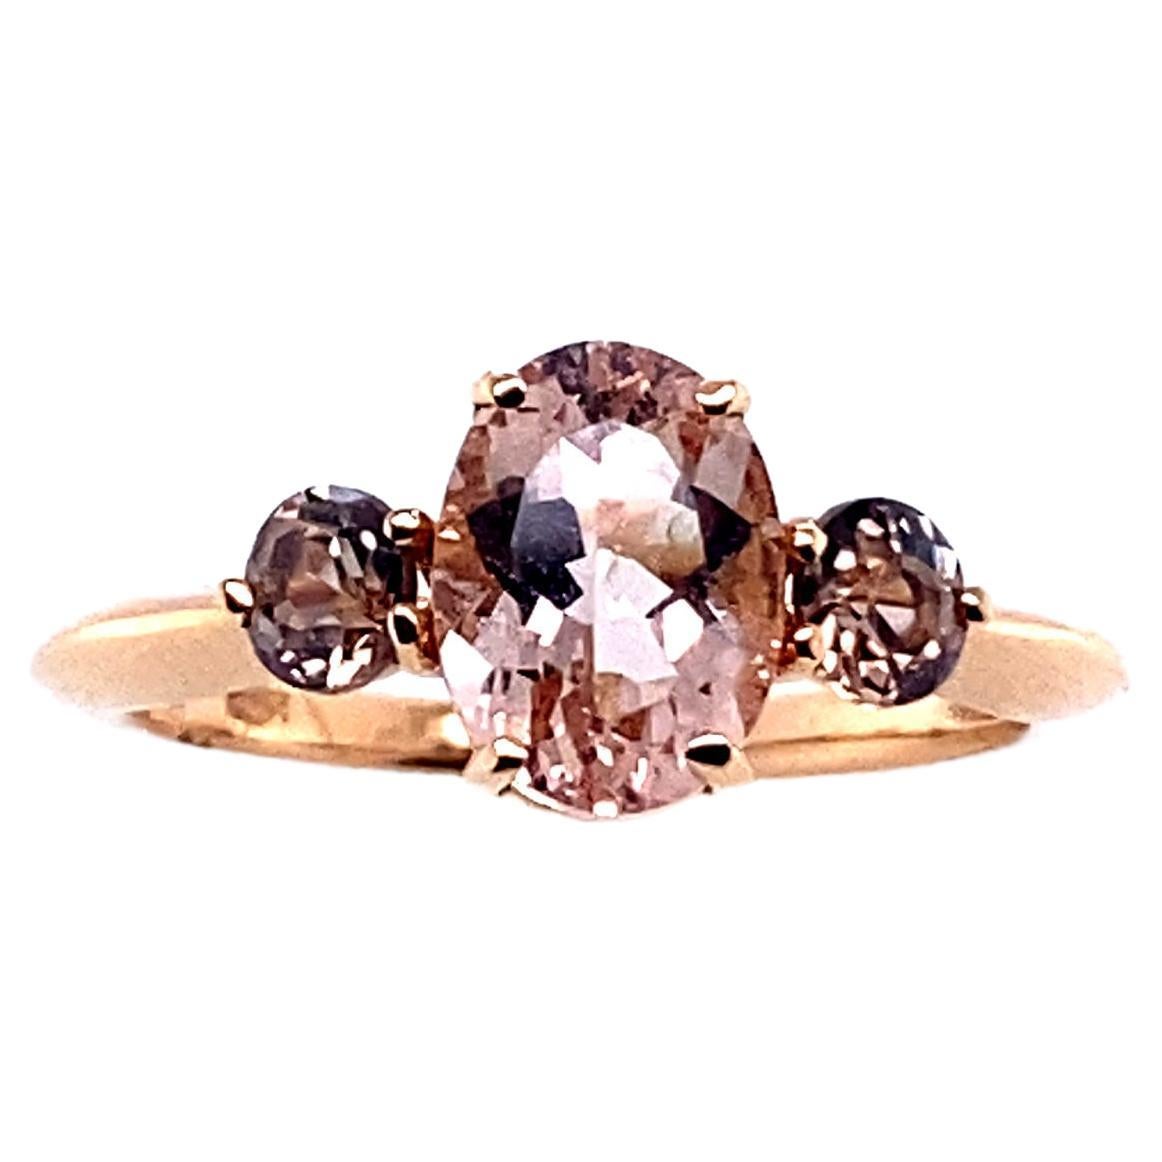 Rose Gold Ring Surmounted by a Morganite and Surrounded by Two Tourmalines

The weight of the gold is 2.60 grams of carats.
The weight of the ring is 2.9 grams.
The Morganite is 0.8 cm in length and 0.6 cm in width
The Tourmaline is 0.3 cm in length